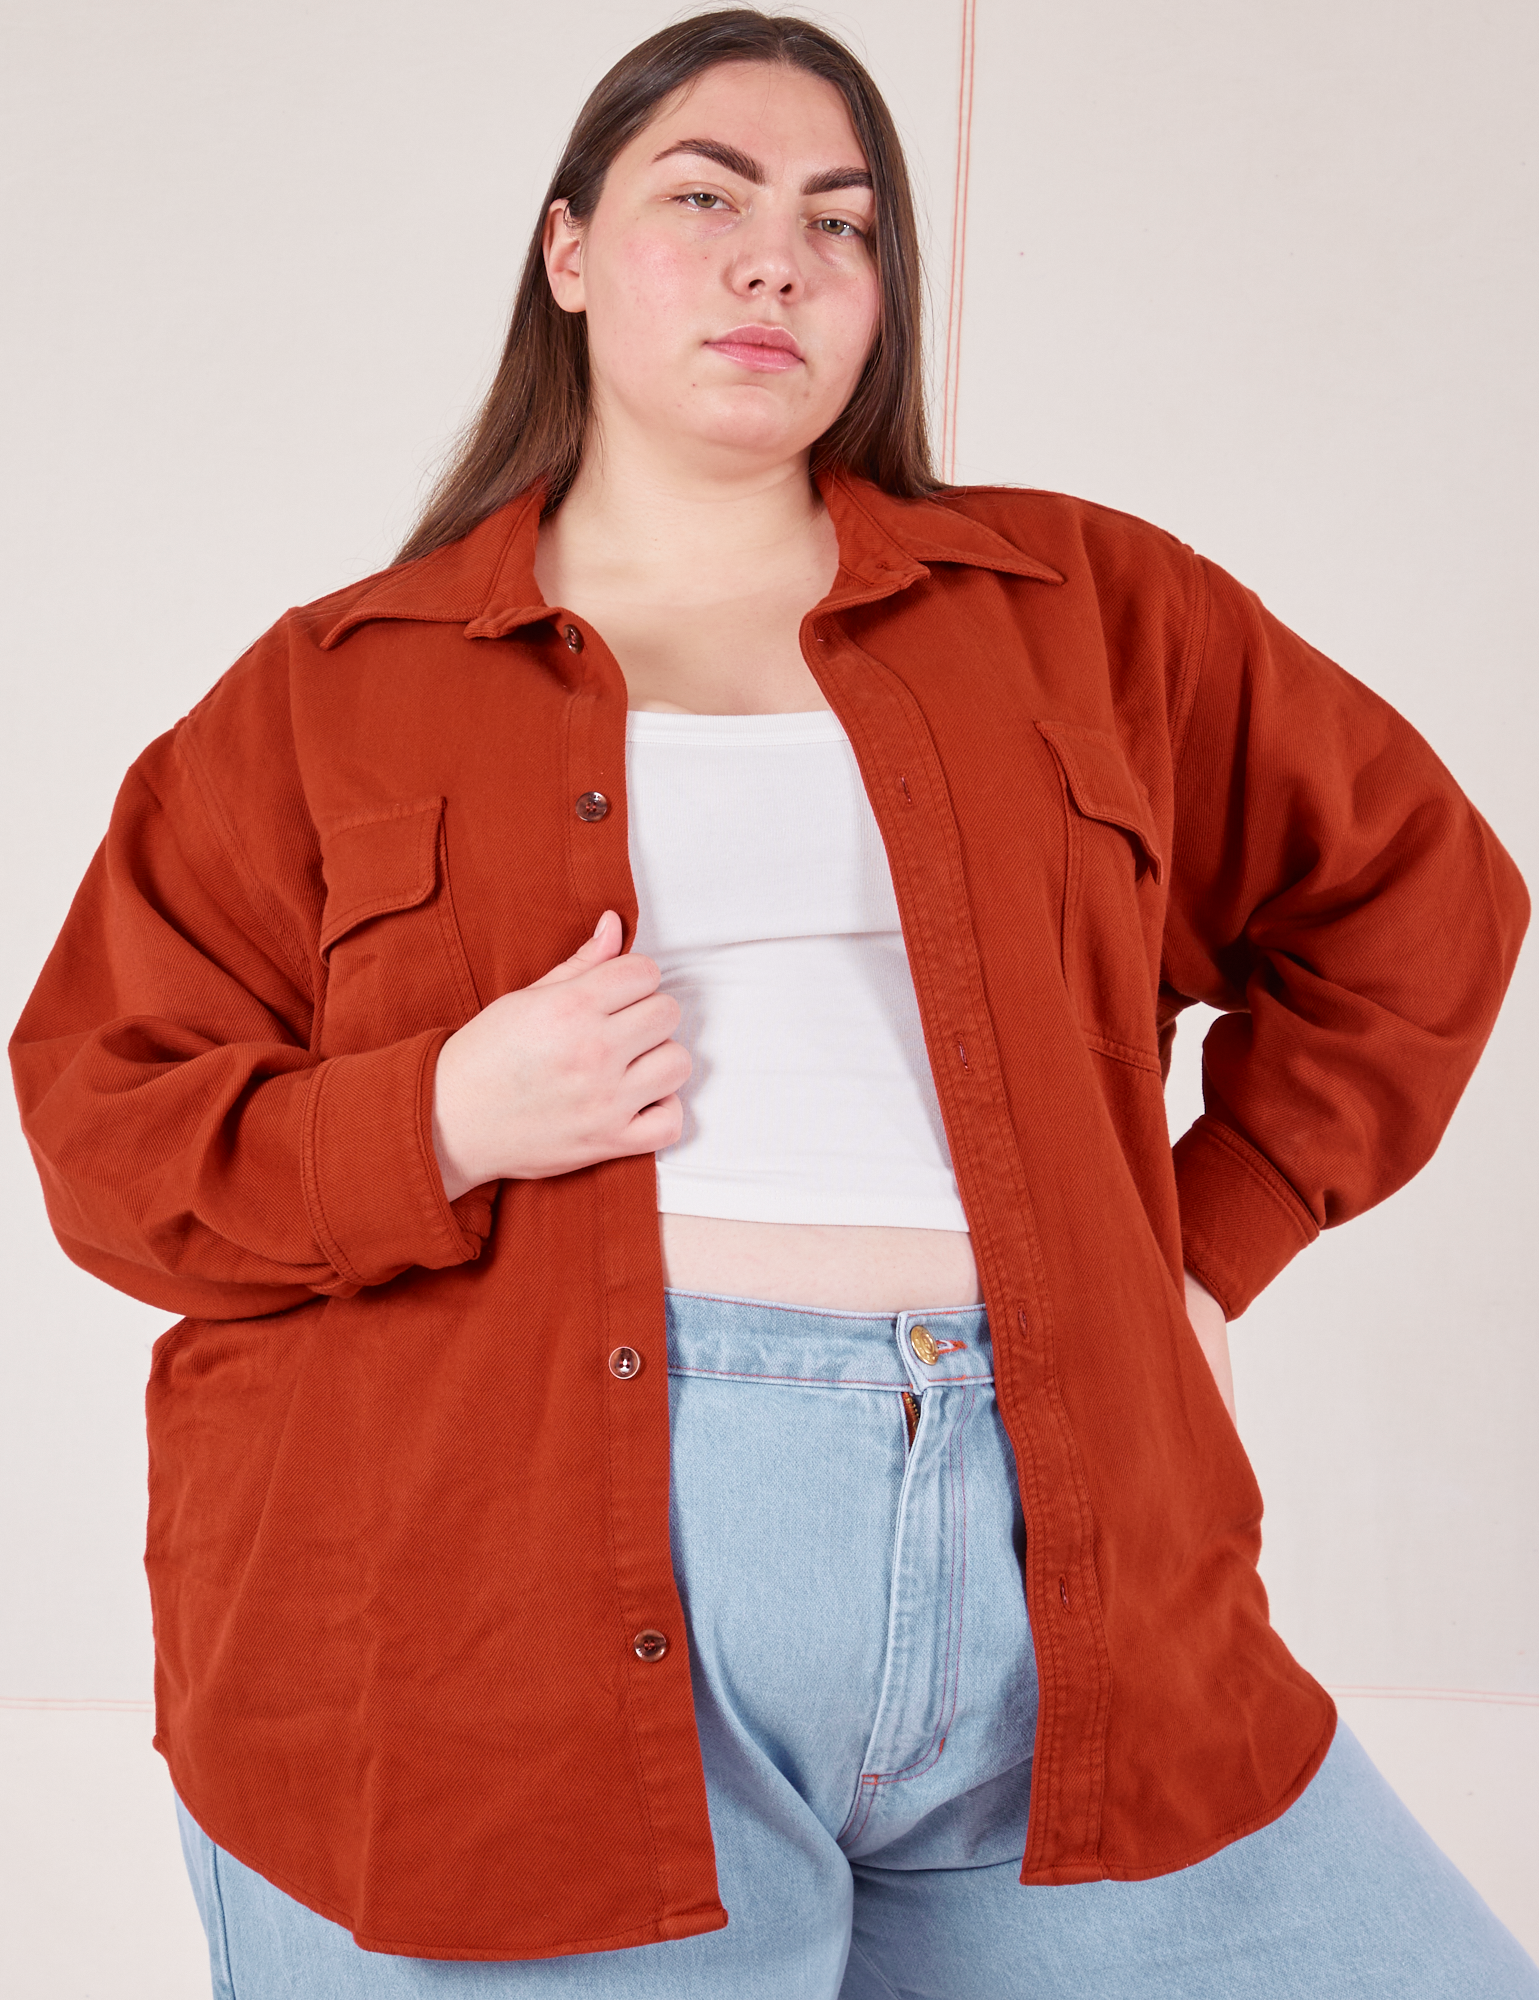 Marielena is wearing Flannel Overshirt in Paprika, vintage off-white Cropped Tank Top and light wash Trouser Jeans